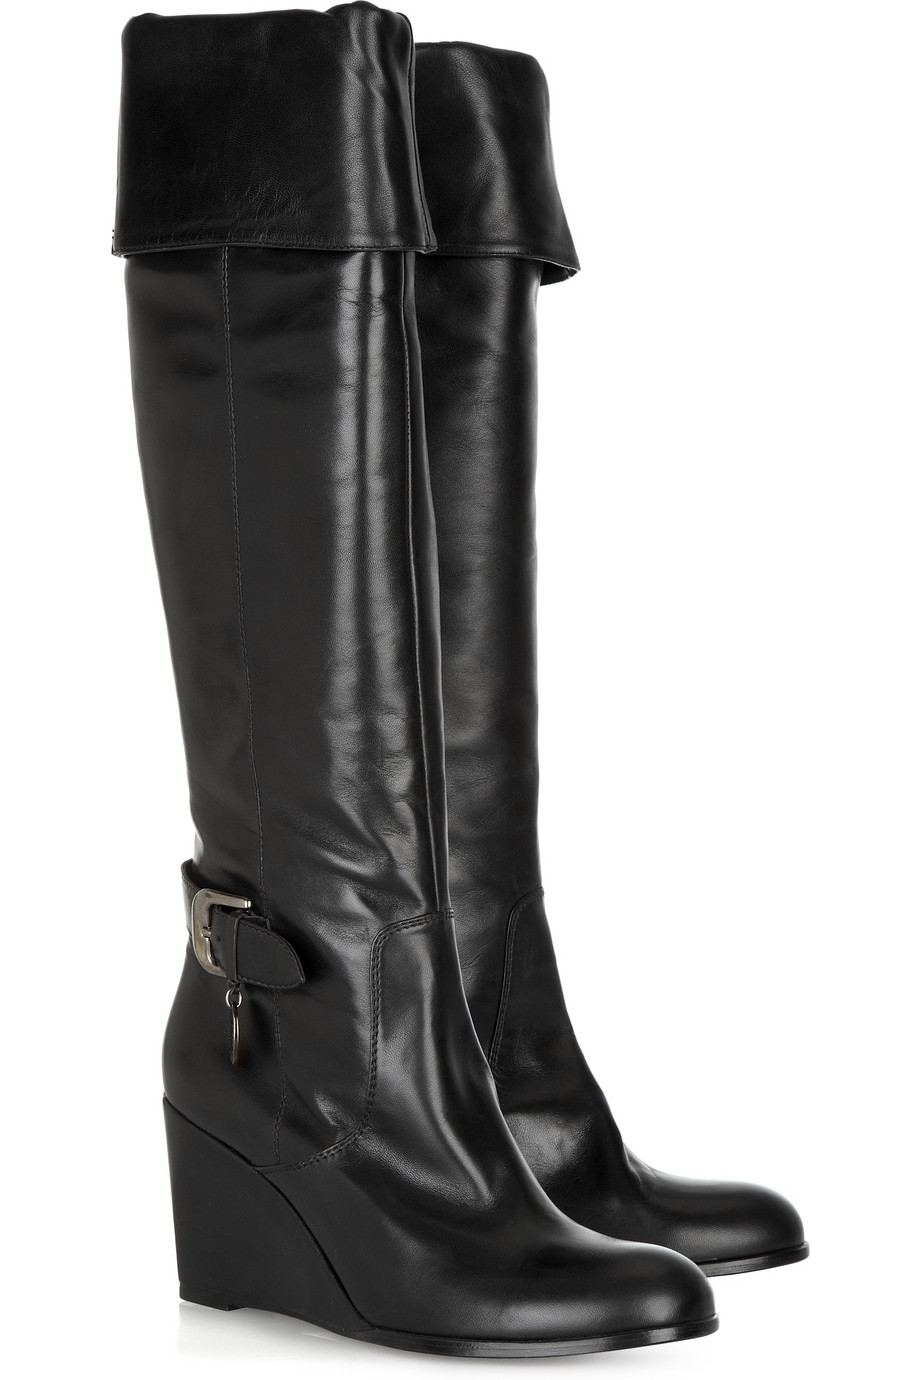 Sonia Rykiel Over-the-knee Leather Wedge Boots in Black | Lyst